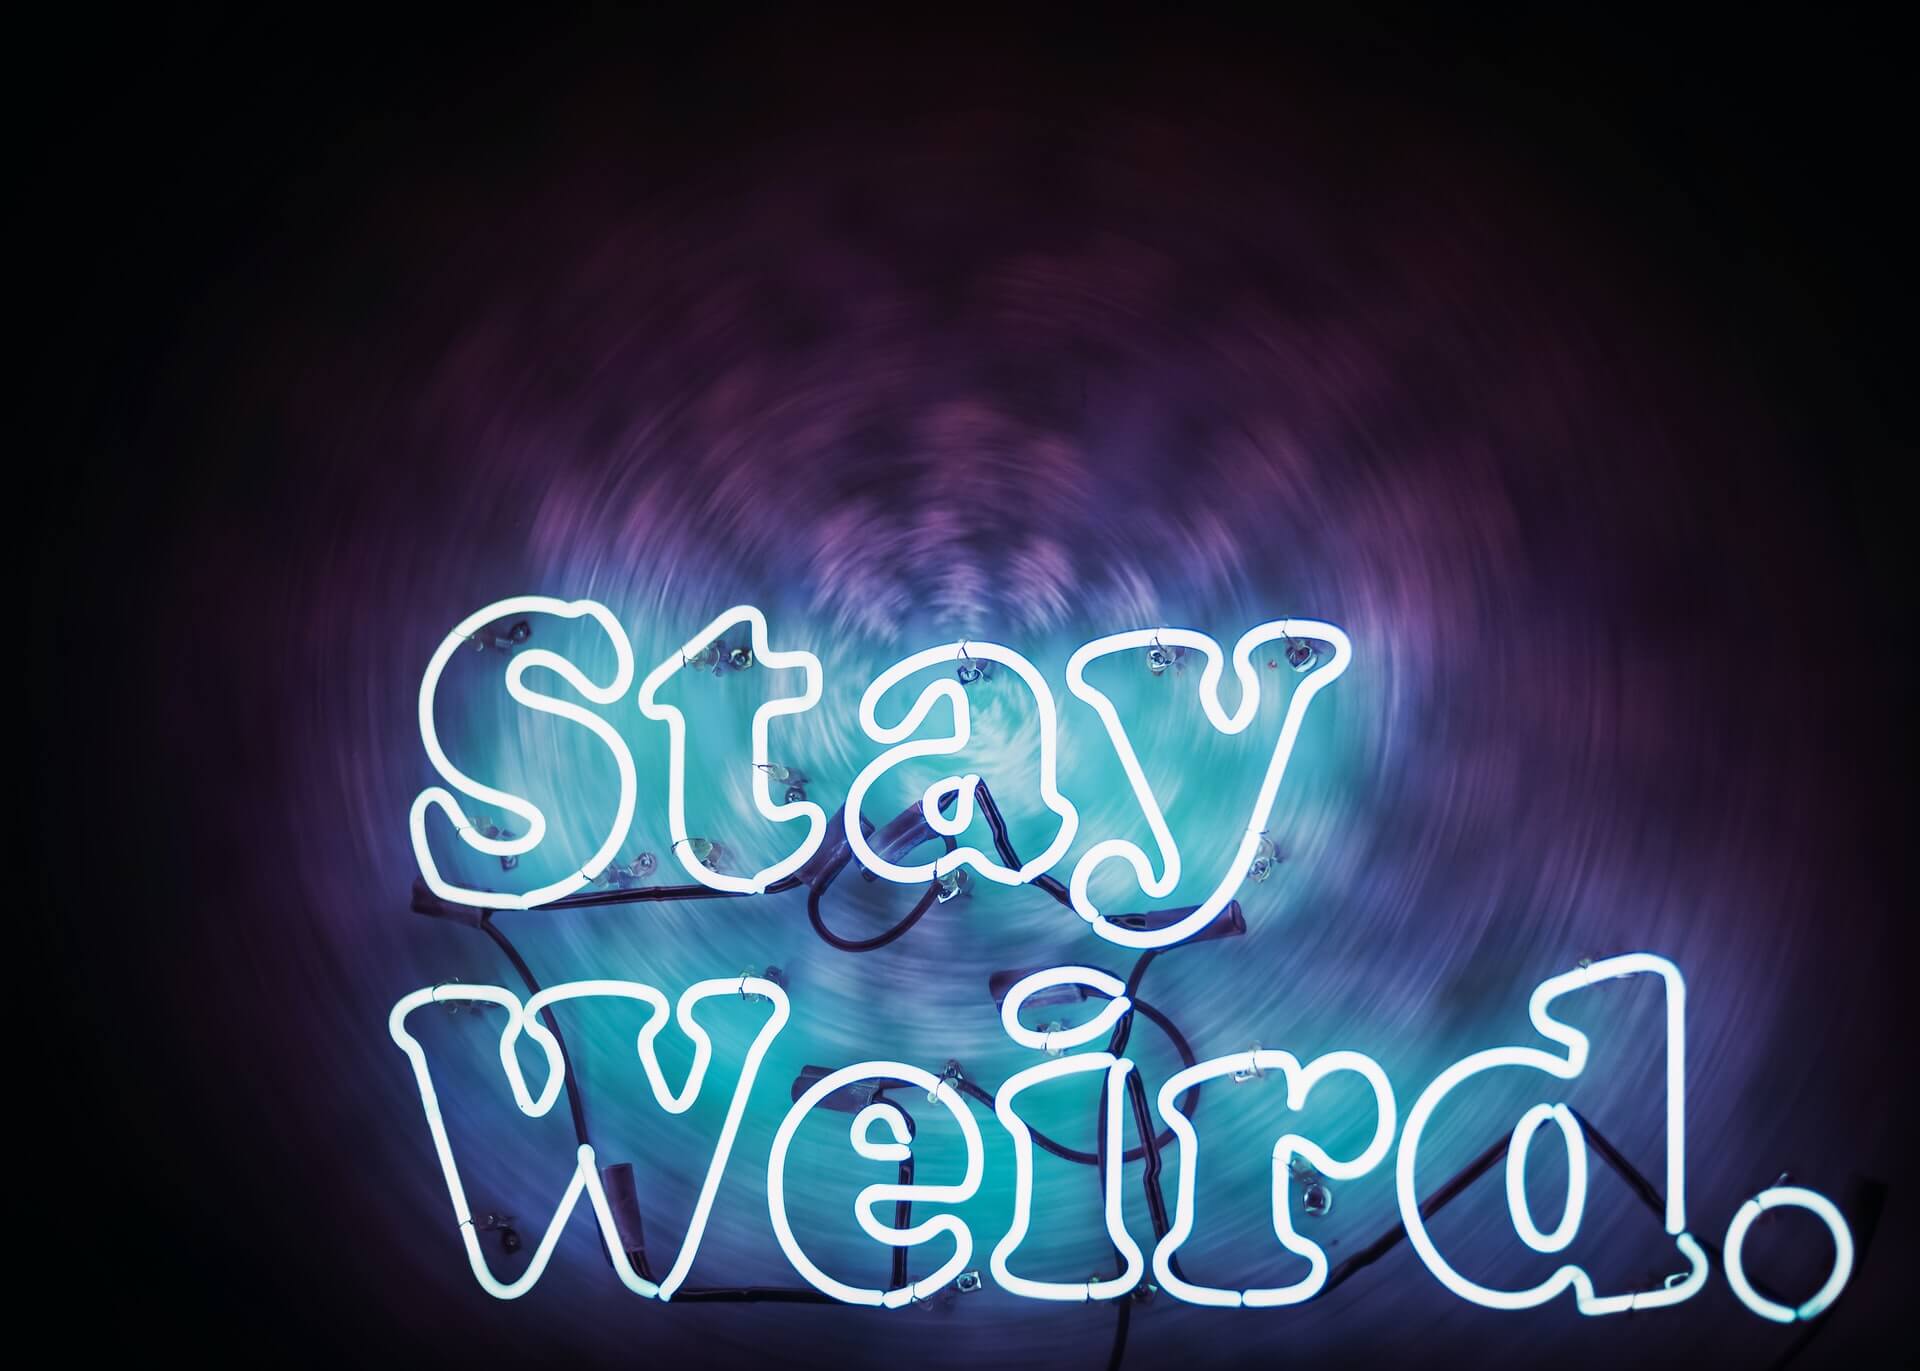 Stay Weird neon sign with purple background